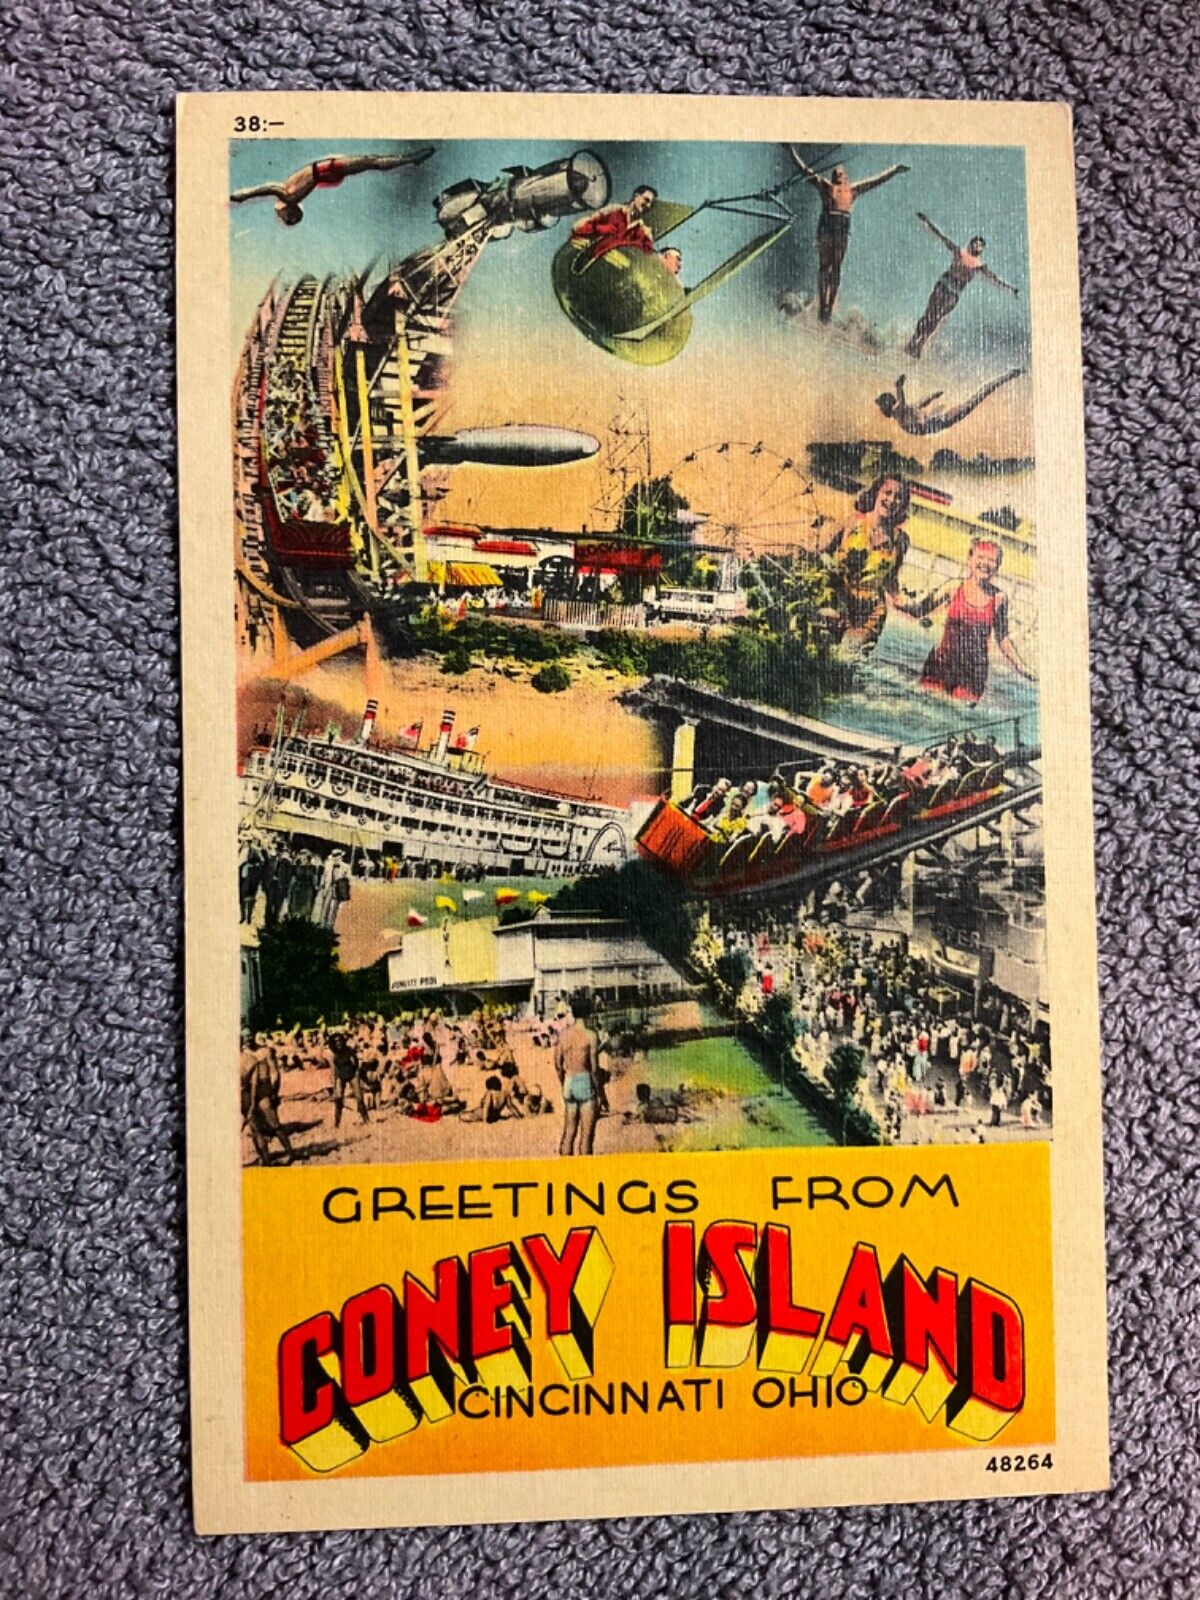 Greetings from Coney Island Cincinnati OH Ohio Large Letter Linen Postcard